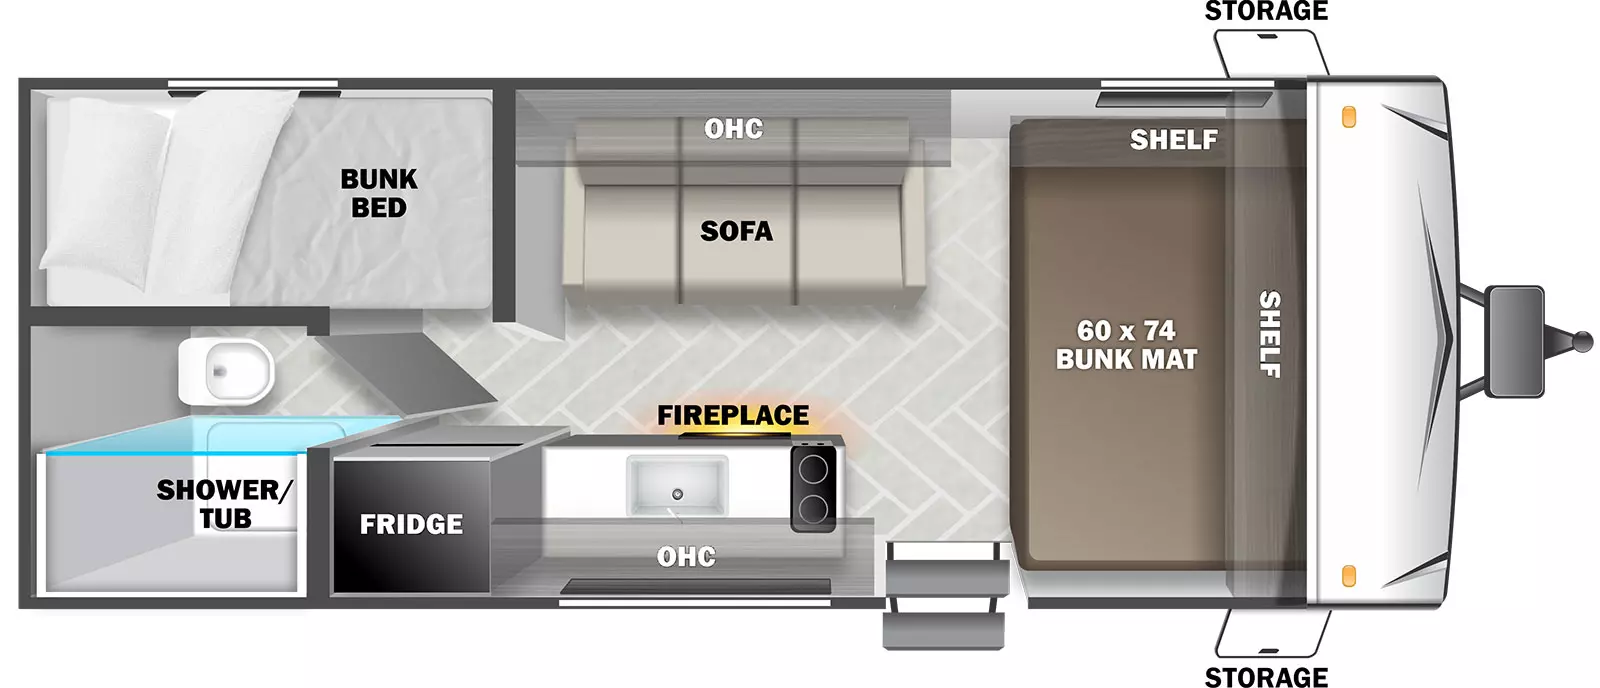 The 175BHCE has no slide outs and 1 entry door. Interior layout from front to back: front 60 x 74 bunk mat with shelves above; off-door side sofa with overhead cabinet; door side kitchen with sink, refrigerator, fireplace, overhead cabinet and stove top; rear door side bathroom with shower/tub and toilet; and rear off-door side bunk bed.